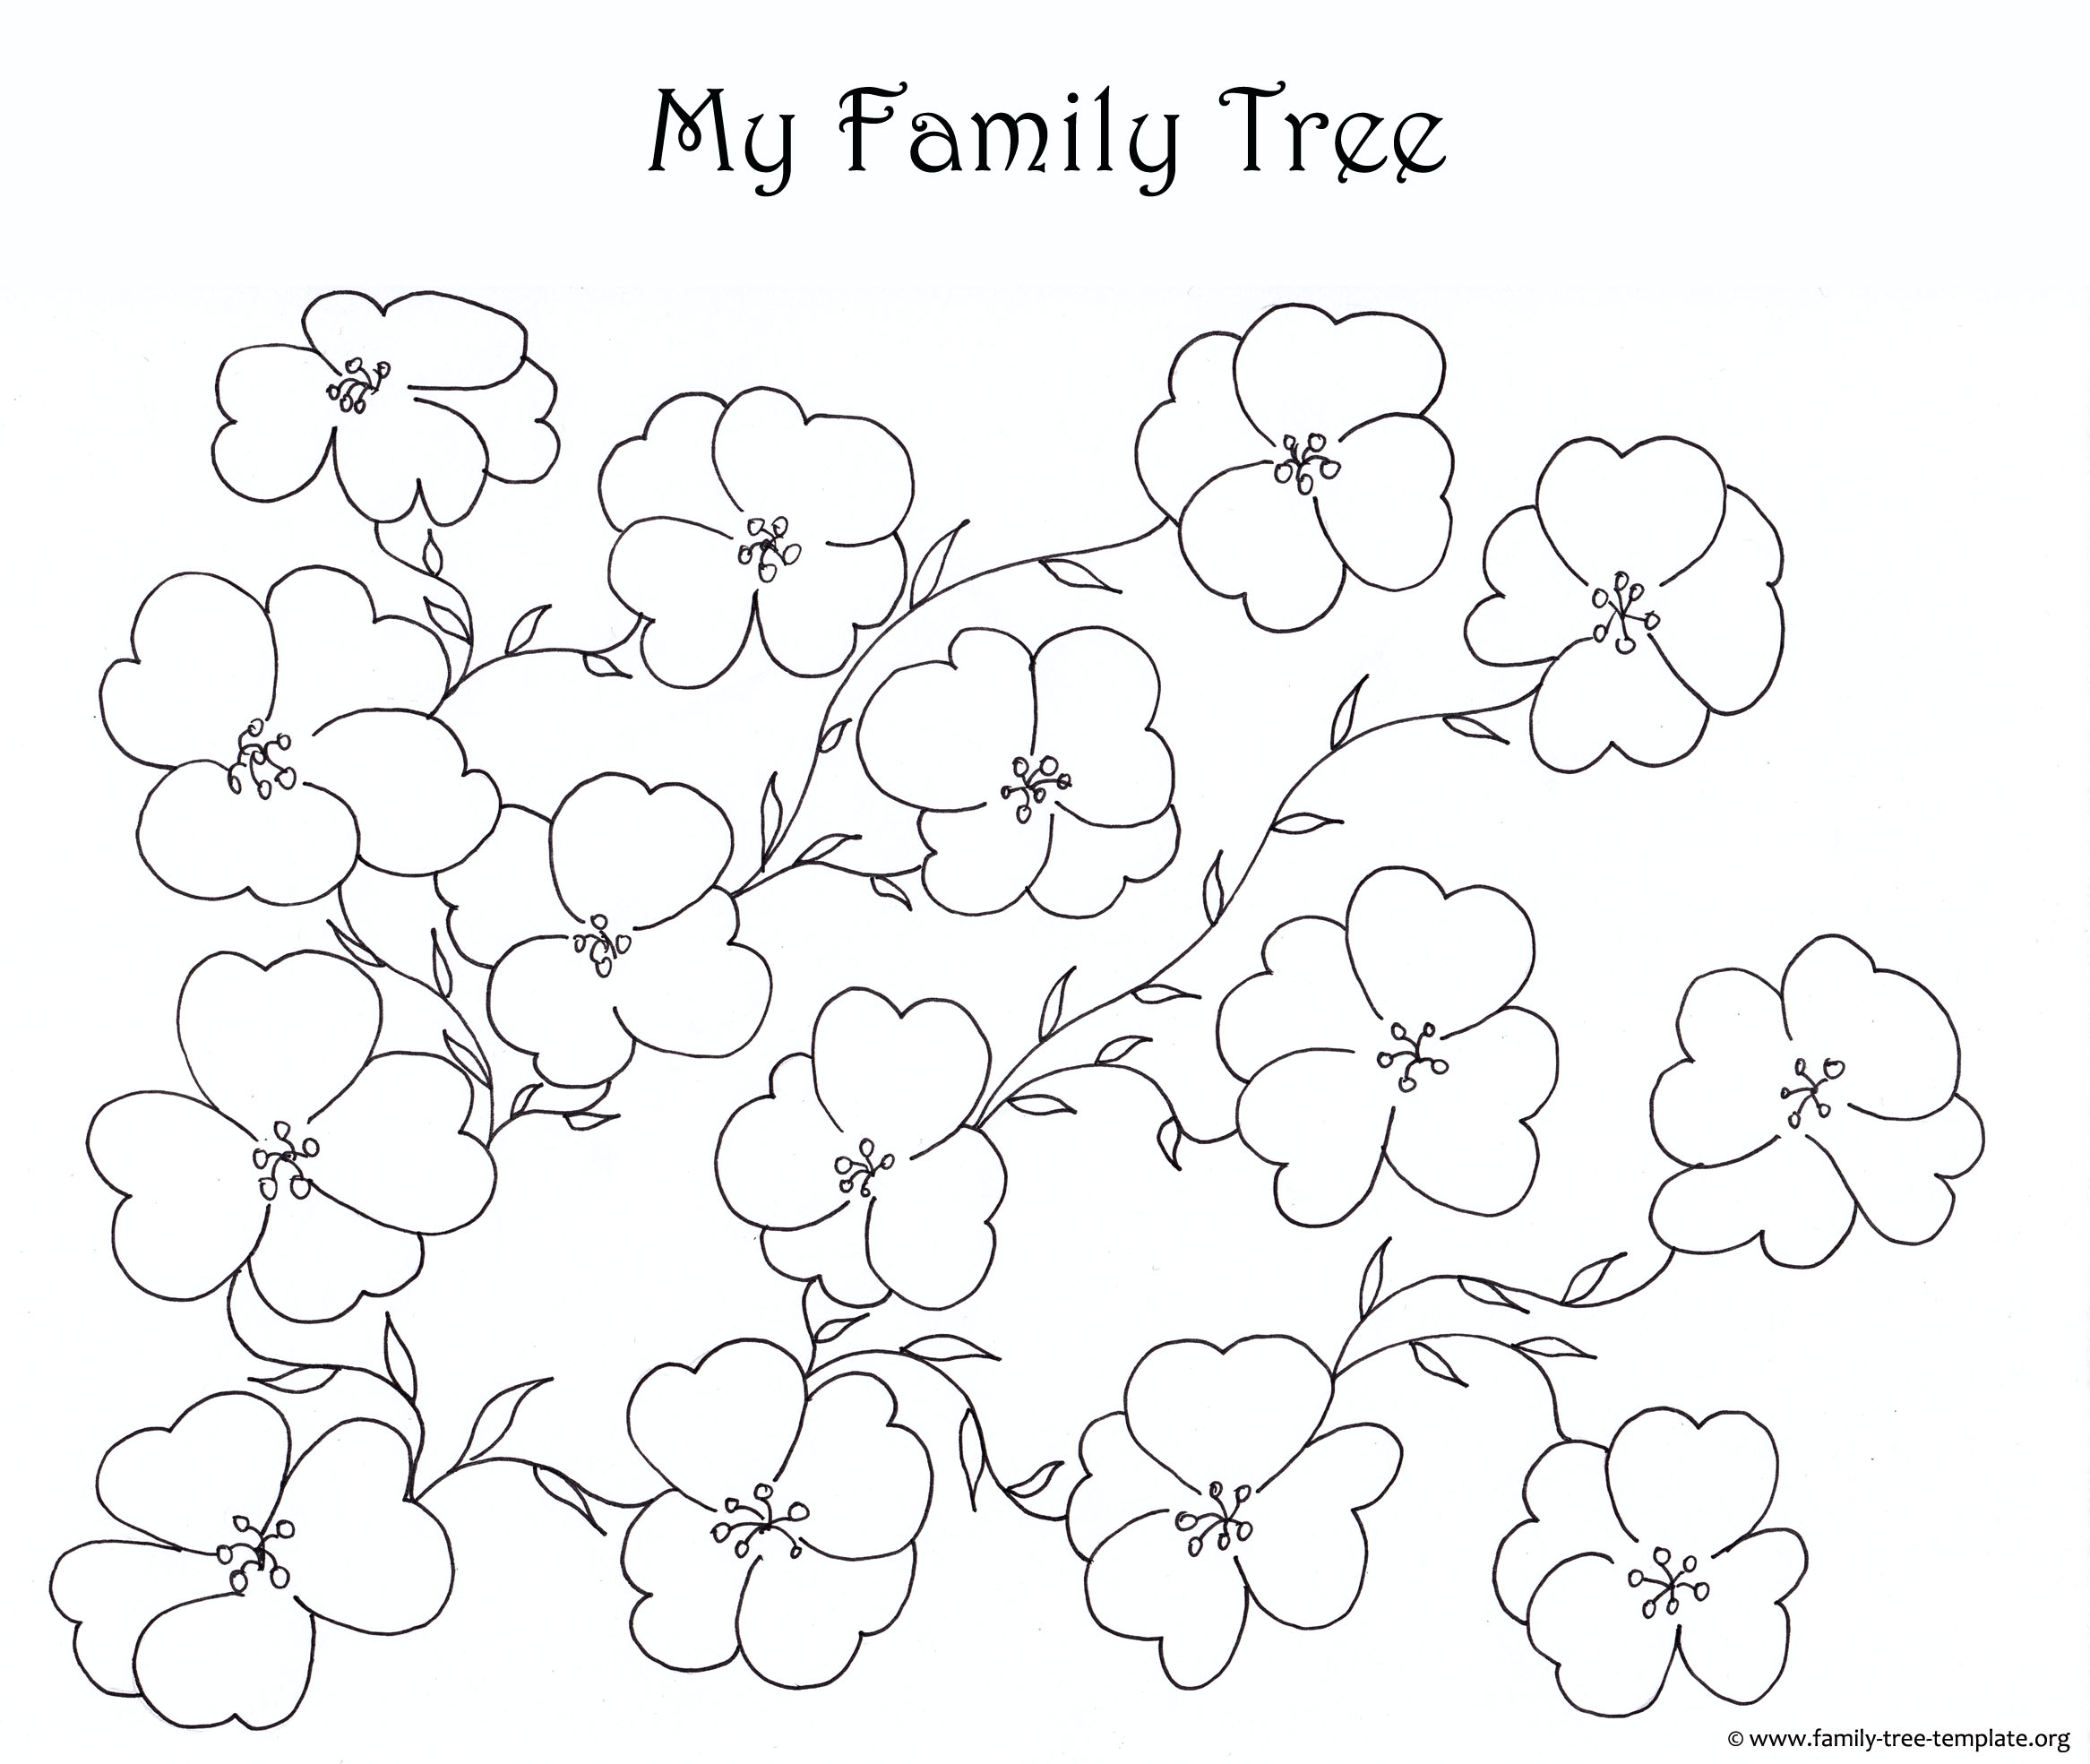 Blank family tree for kids to color: Flower theme.